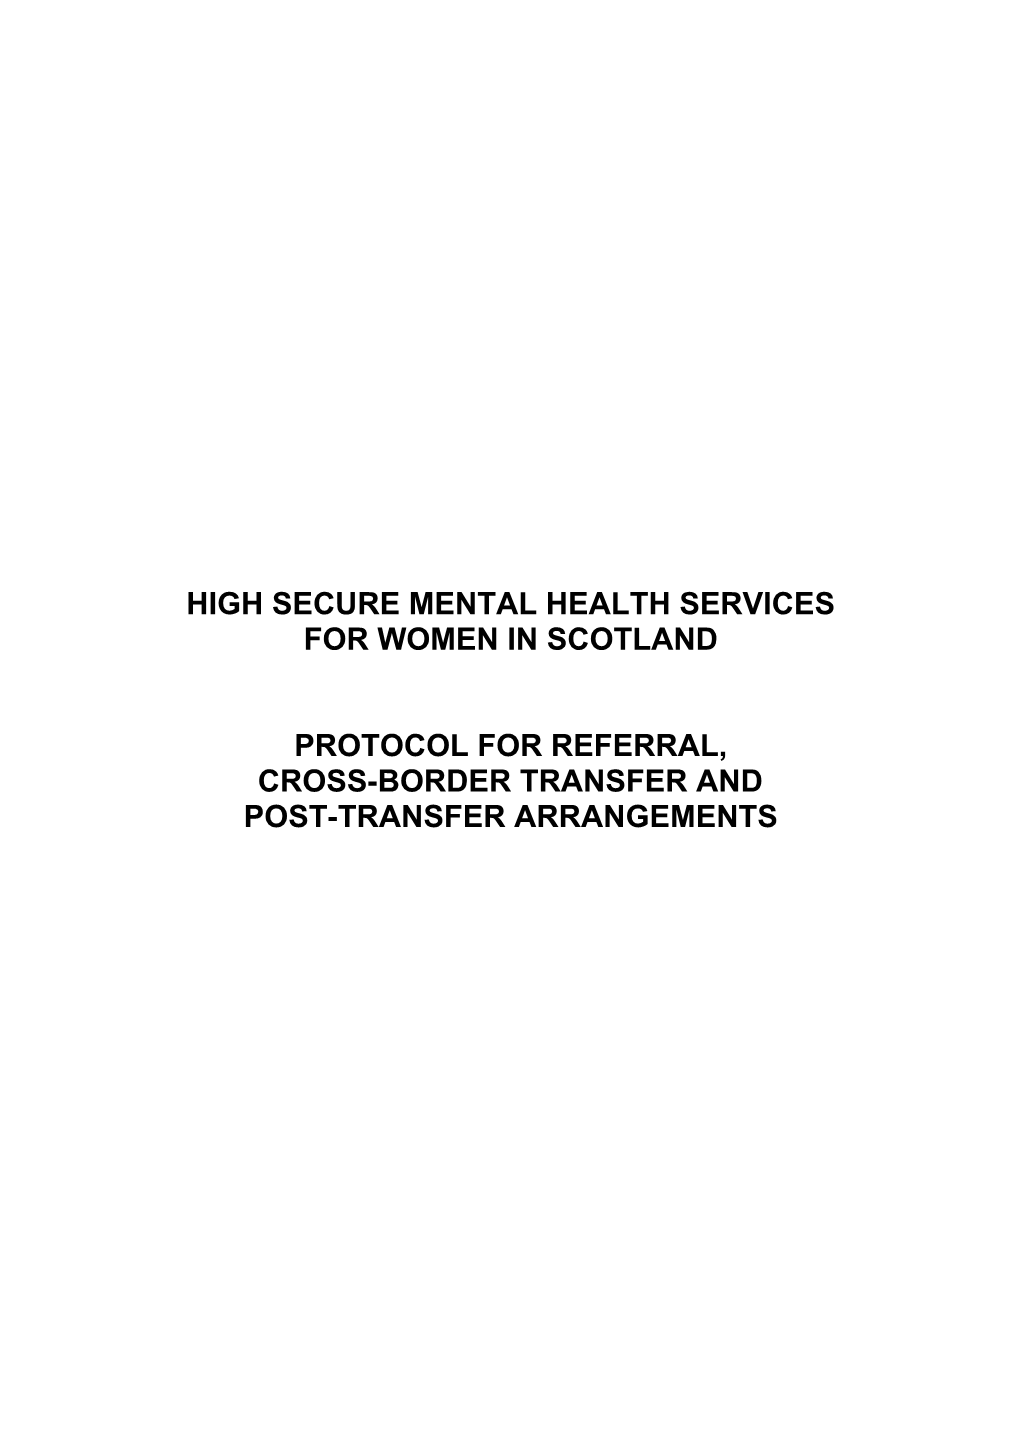 High Secure Mental Health Services for Women in Scotland